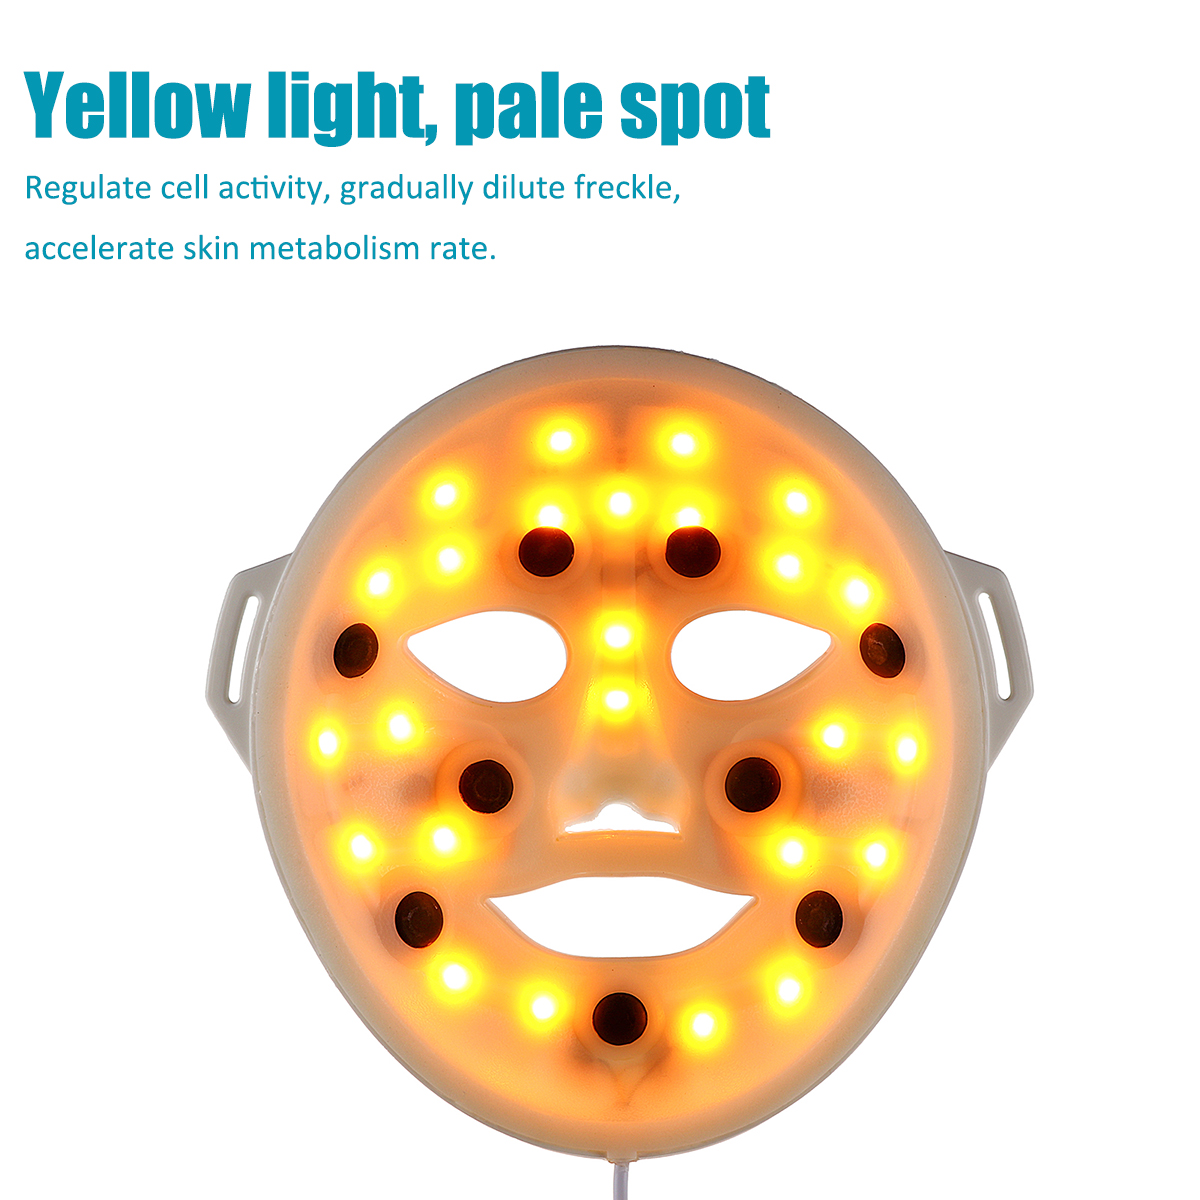 LED-Photon-Therapy-Facial-Mask-3-Colors-Vibration-Skin-Massager-Beauty-Face-Tool-1940393-4